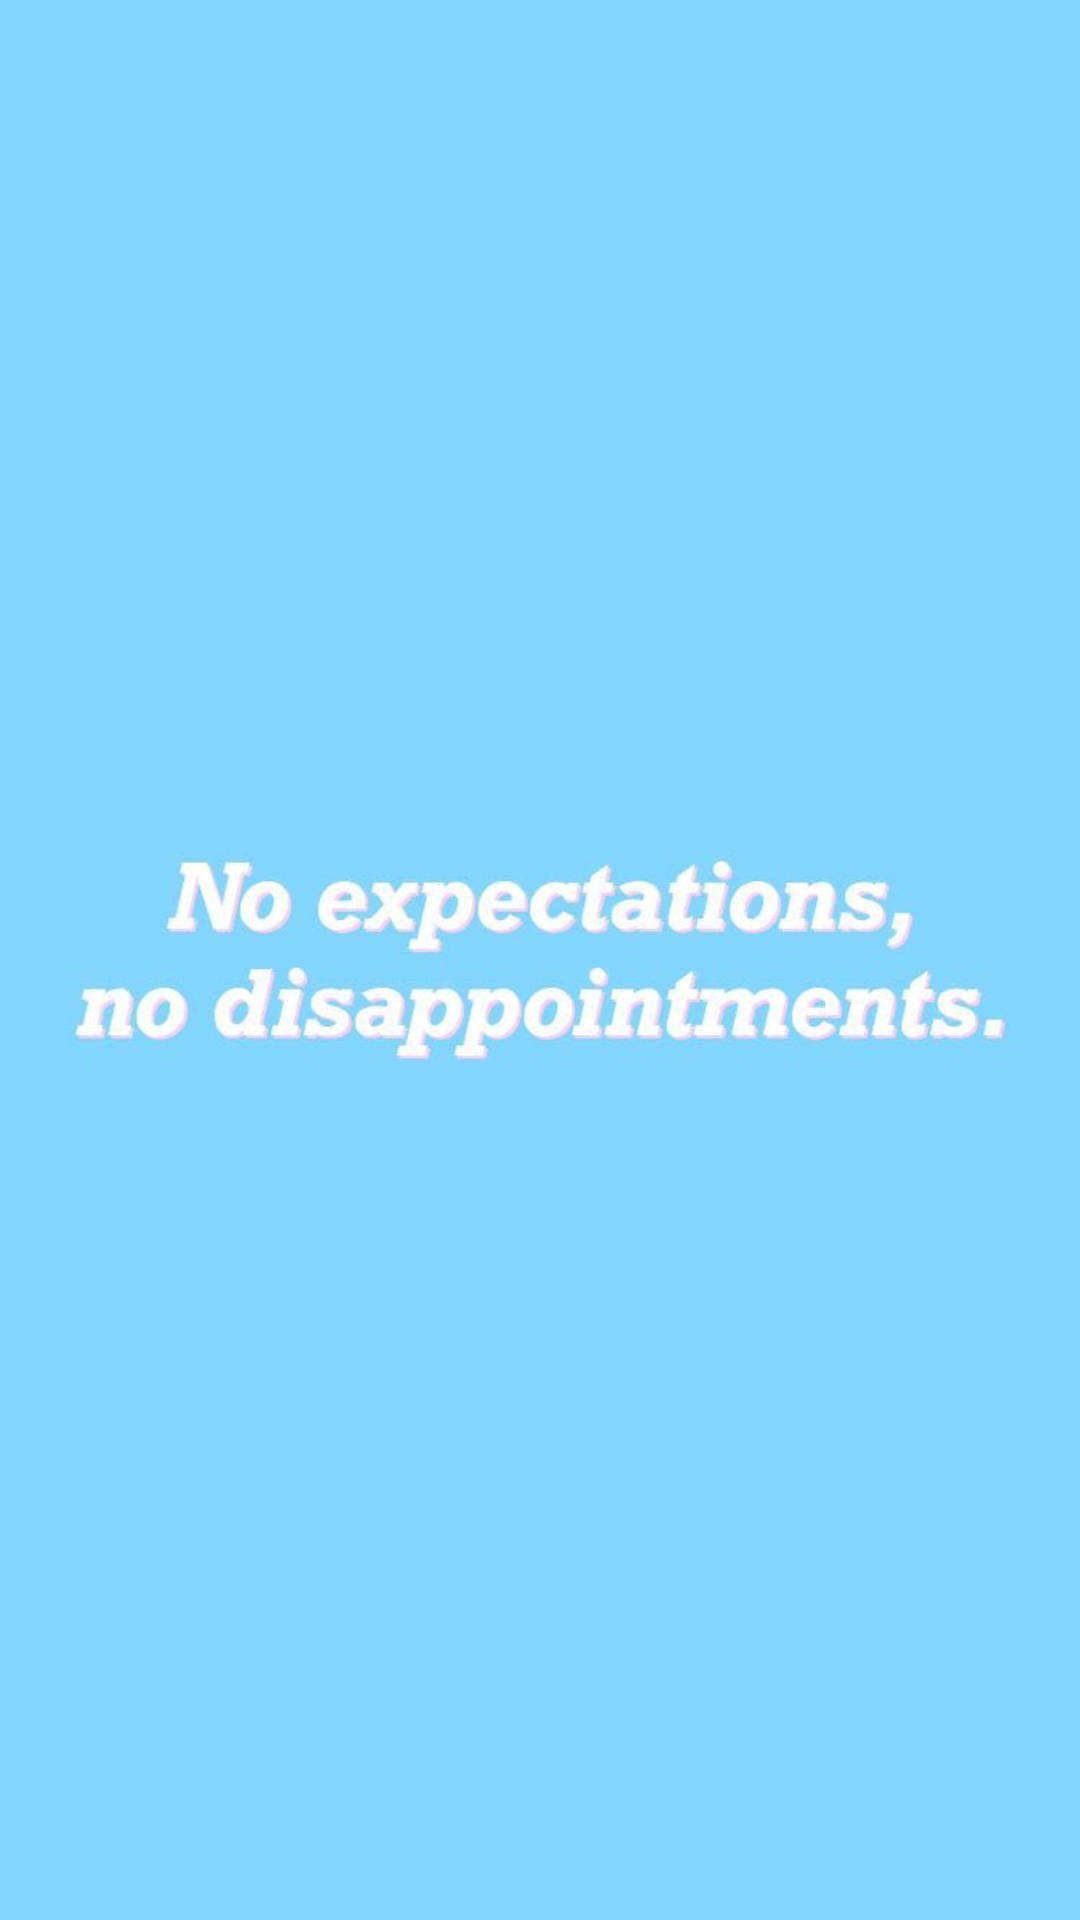 No Expectations Light Blue Aesthetic iPhone Wallpaper